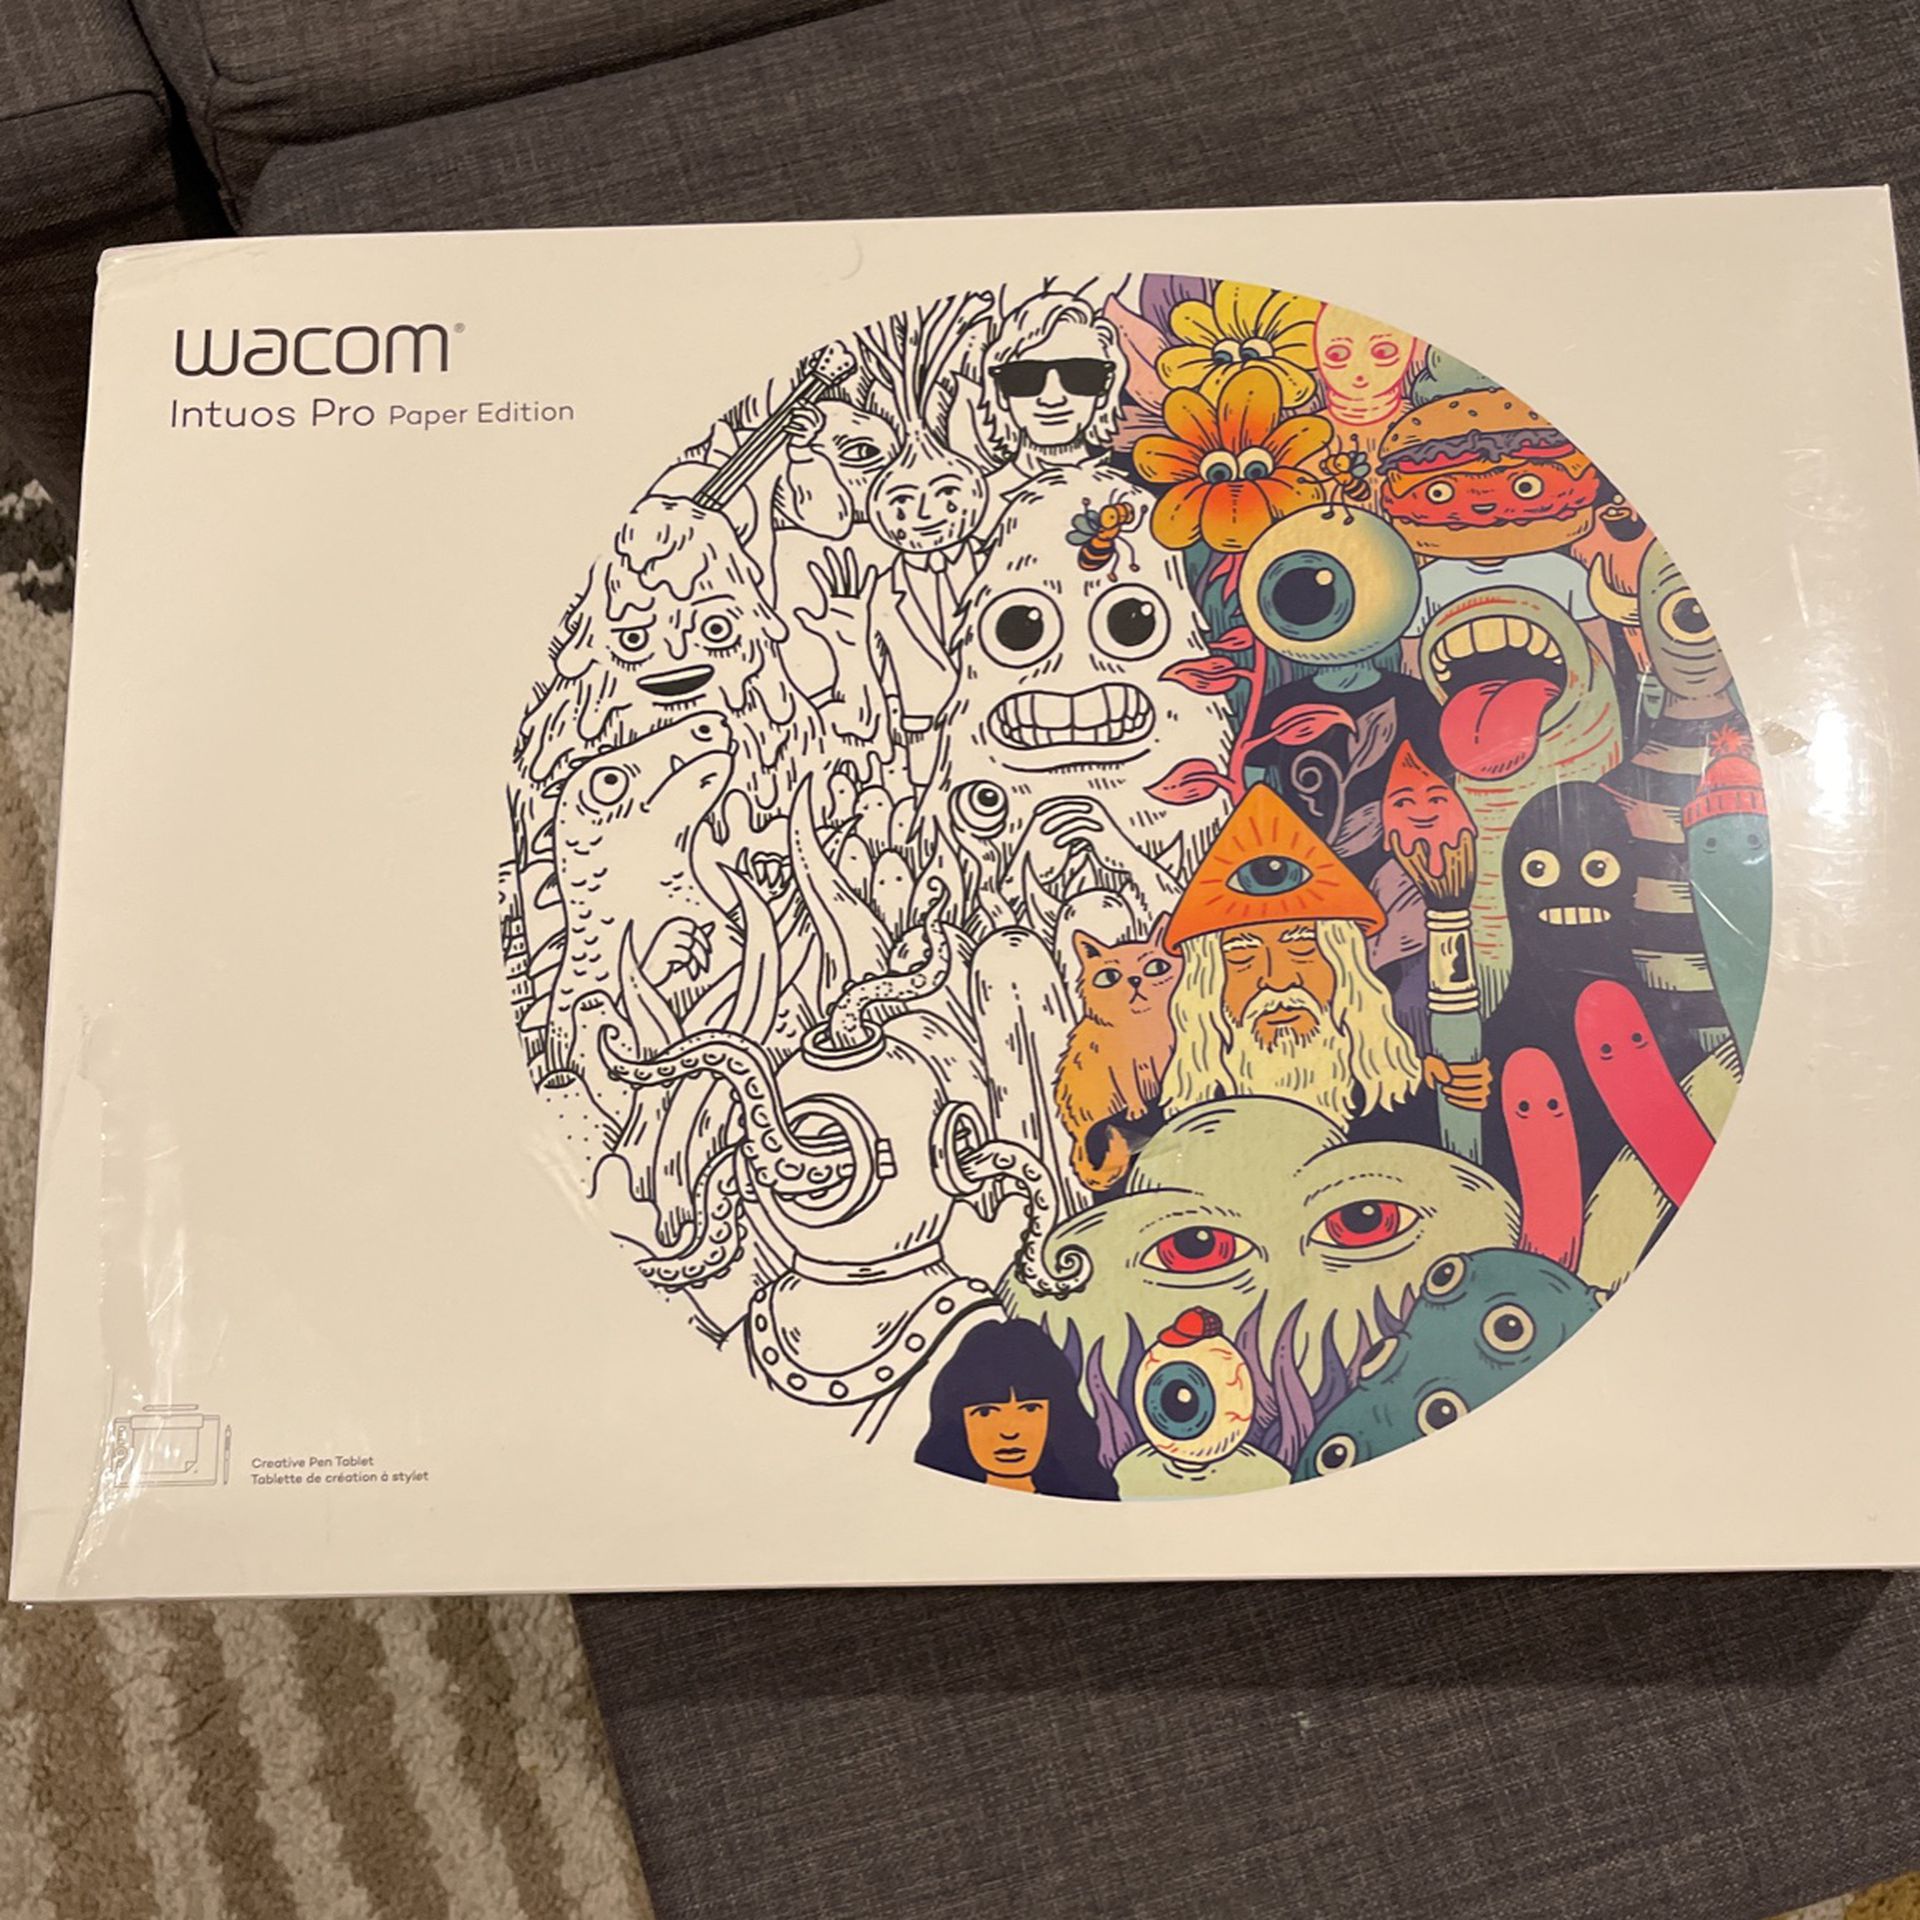 Wacom Intuos Pro - Brand New unopened for Sale in Castro Valley